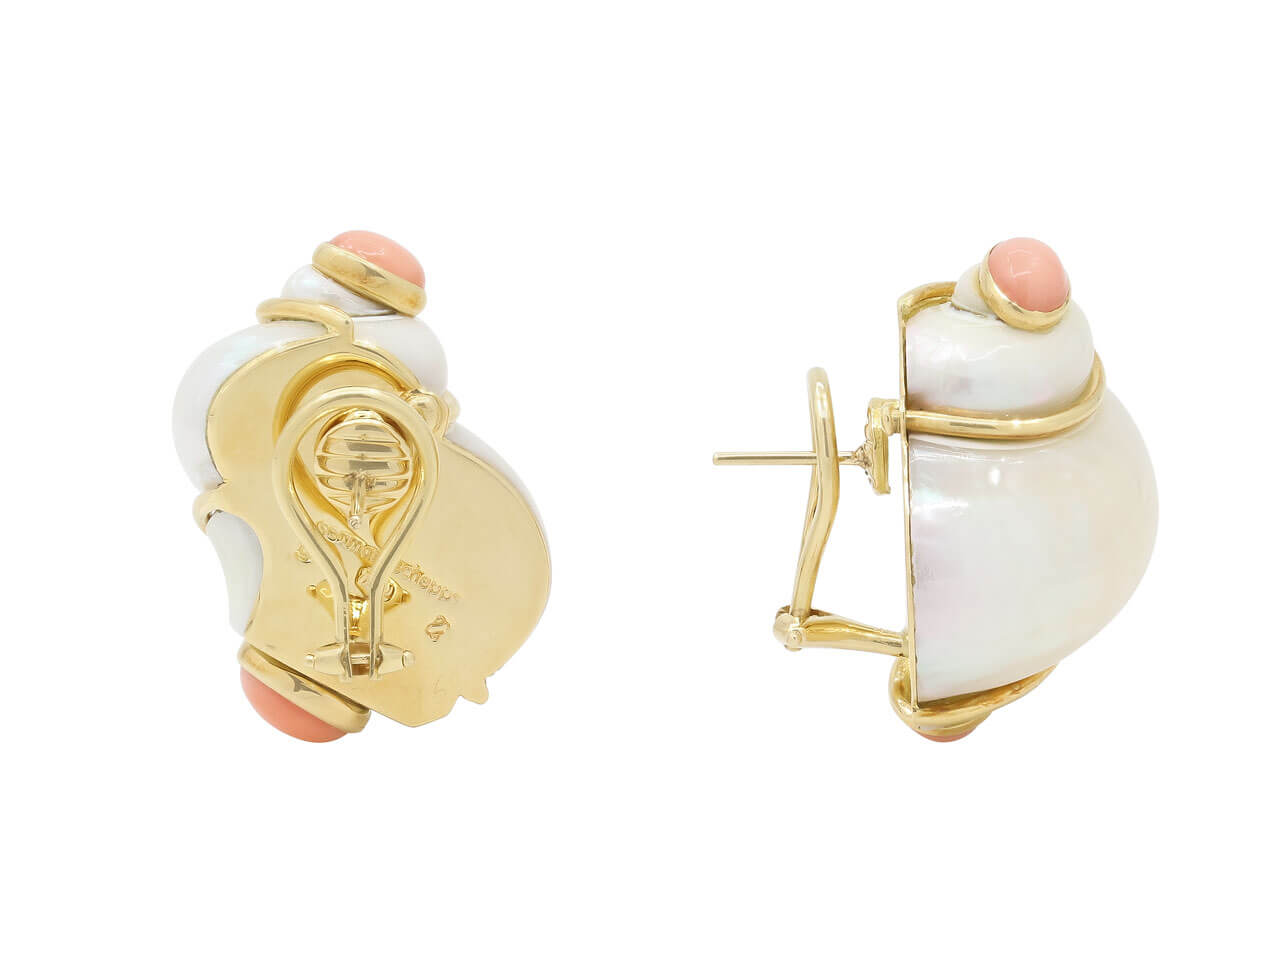 Seaman Schepps 'Turbo Shell' Coral and Pearl Earrings in 18K Gold